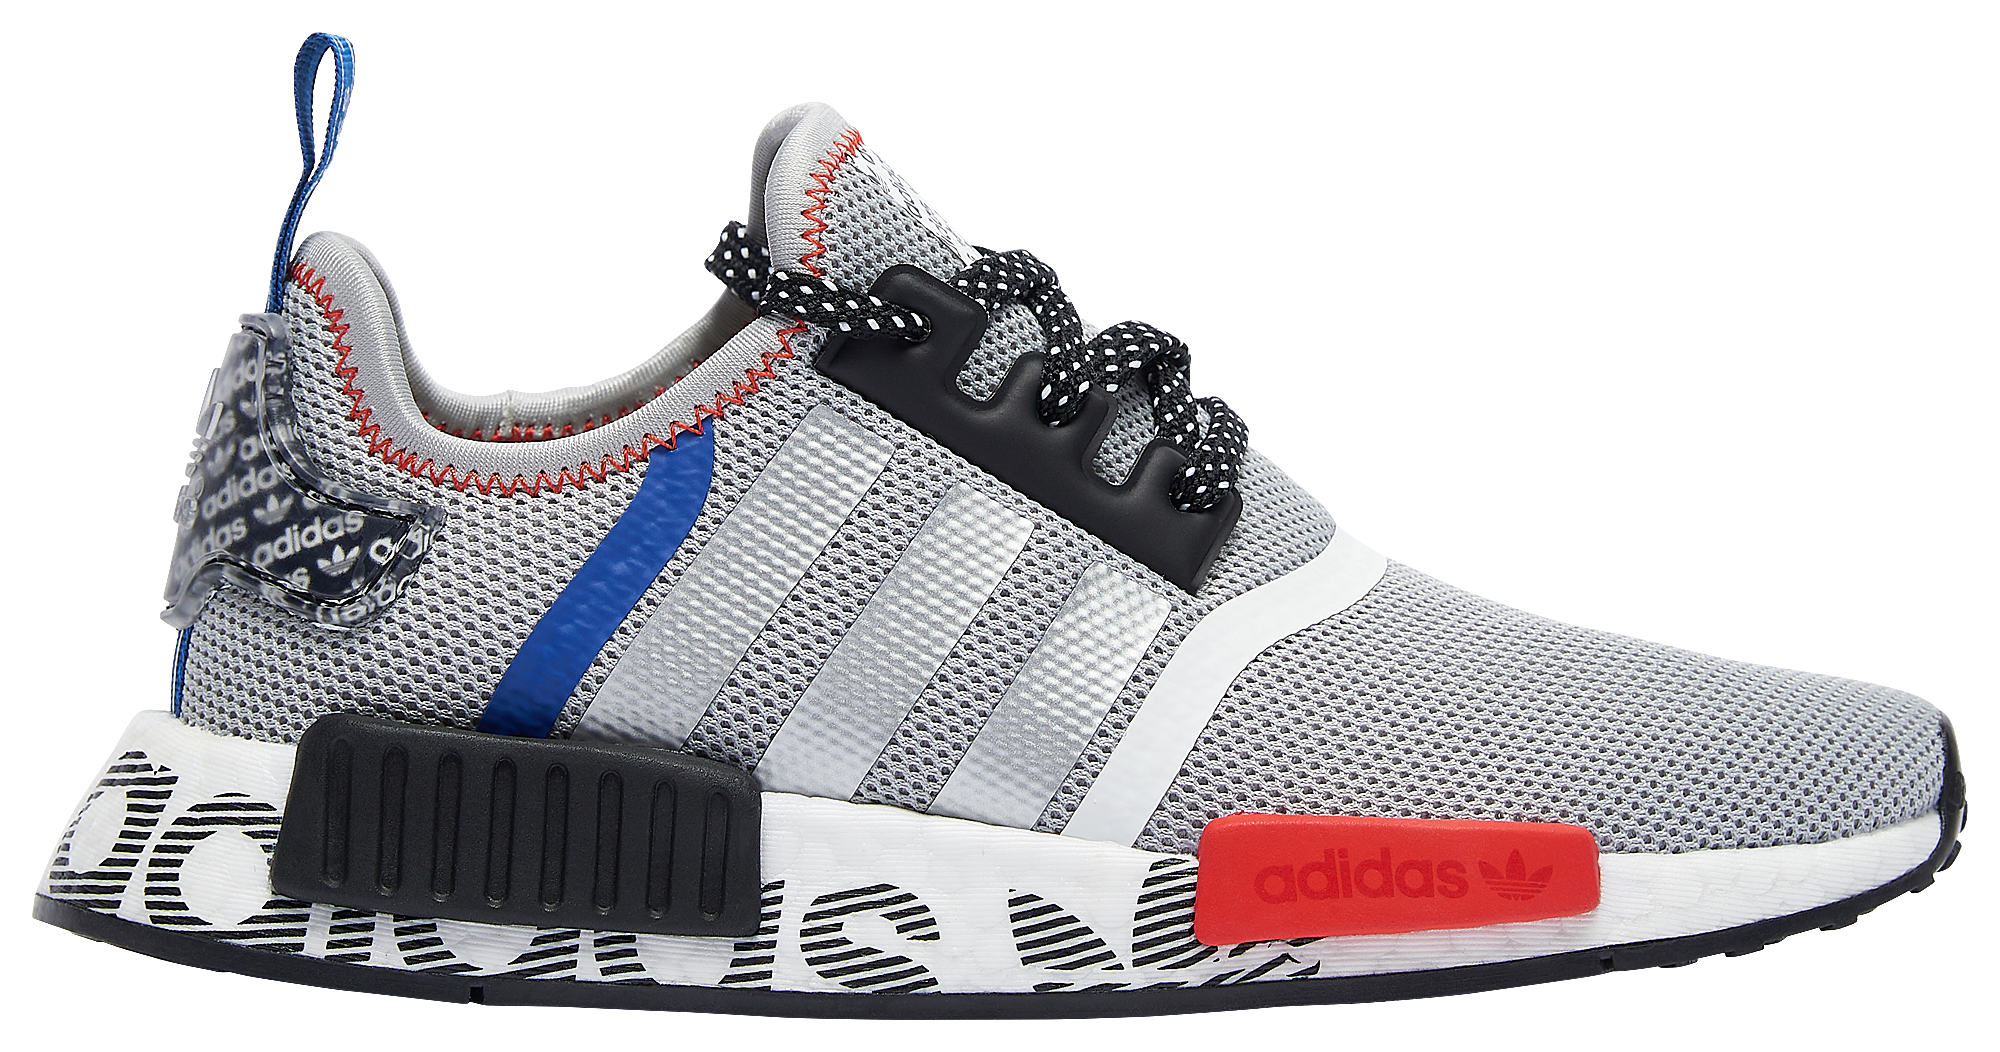 Adidas Nmd R1 White Trace Gray Grailed